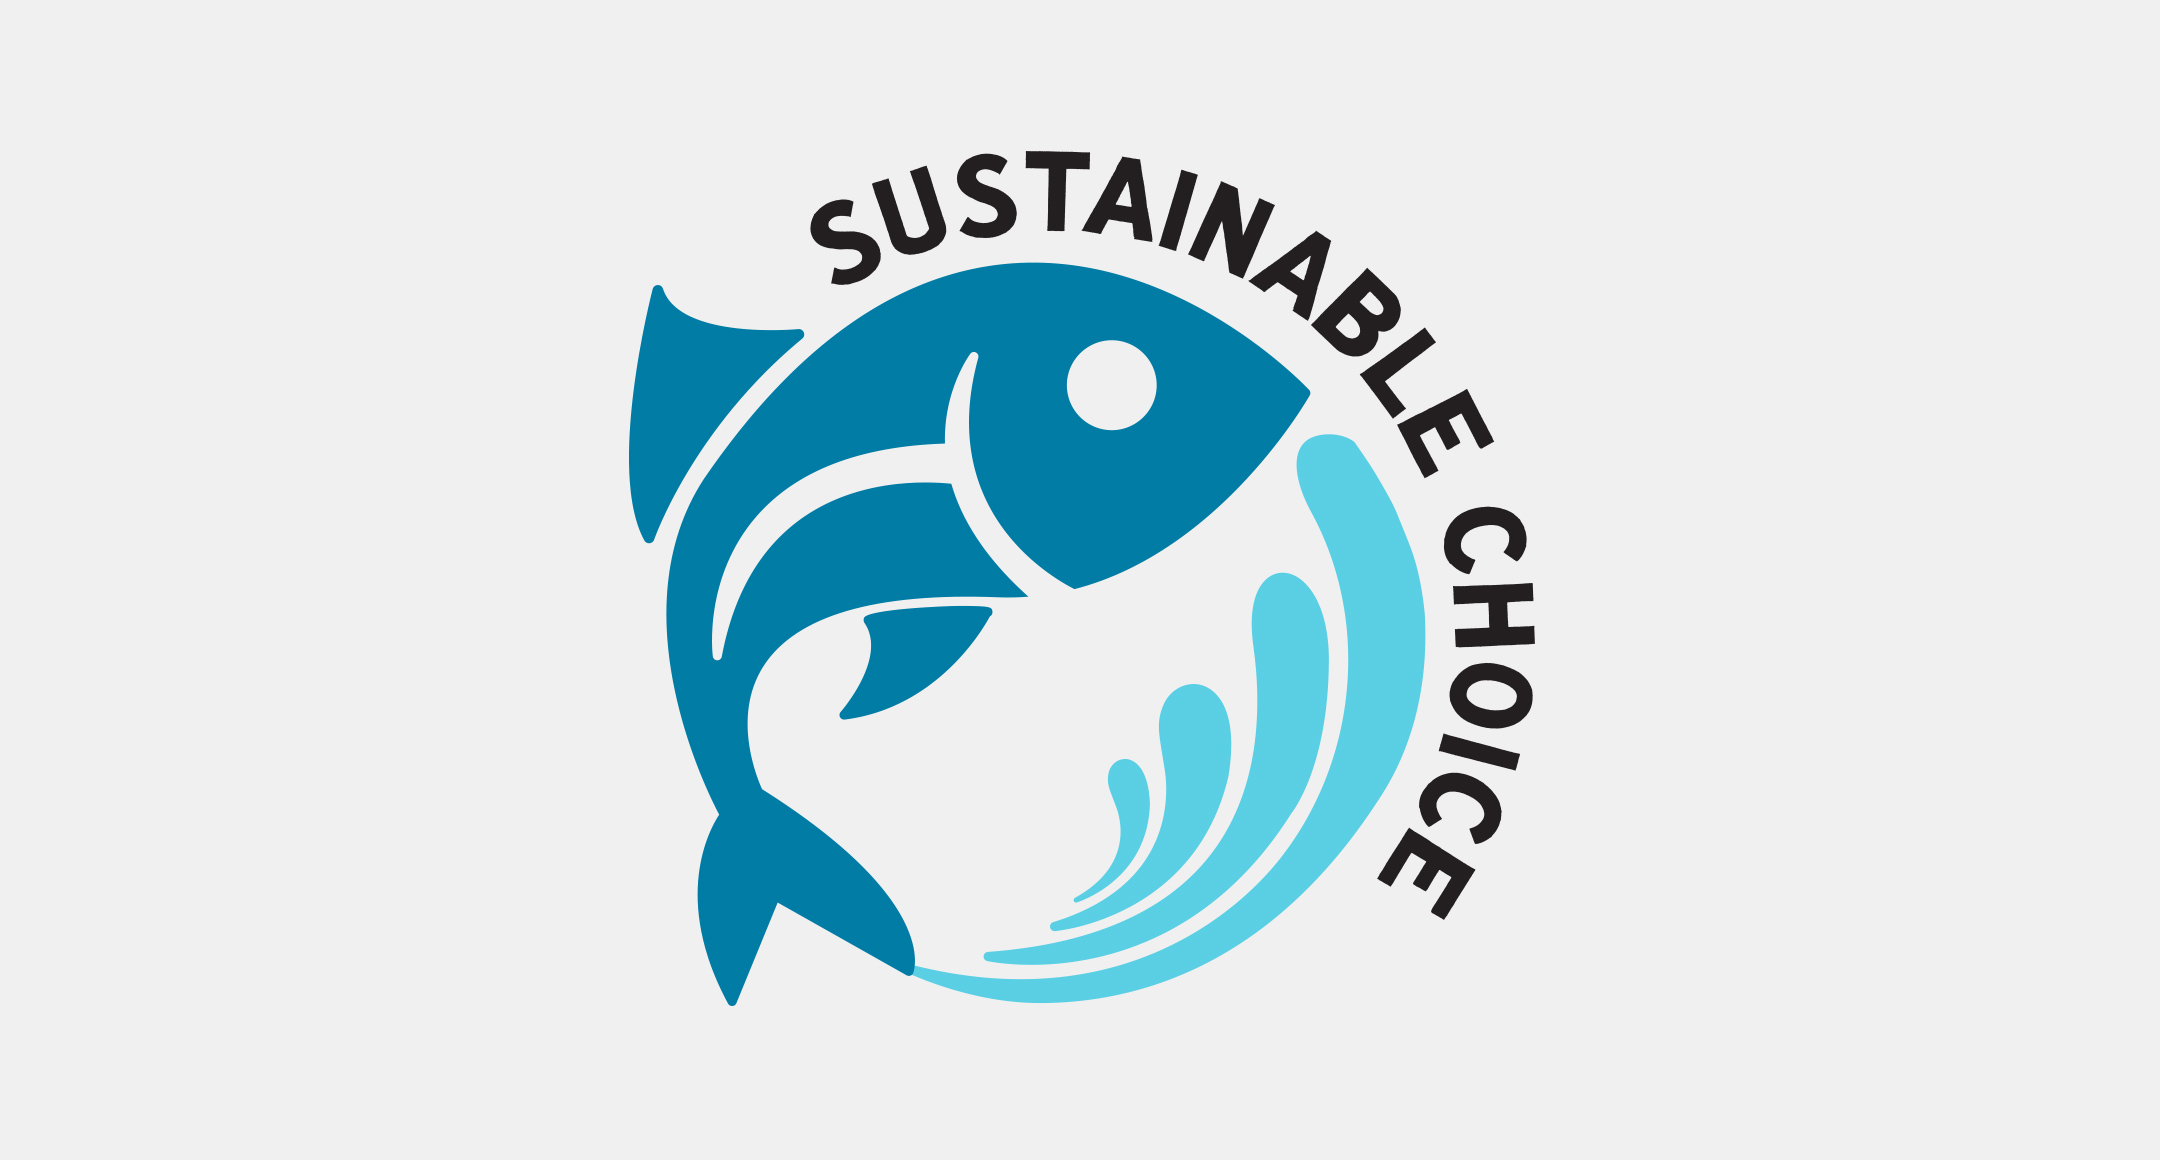 Sustainable Seafood Logo showing an illustration of a fish over water and the words Sustainable Choice.